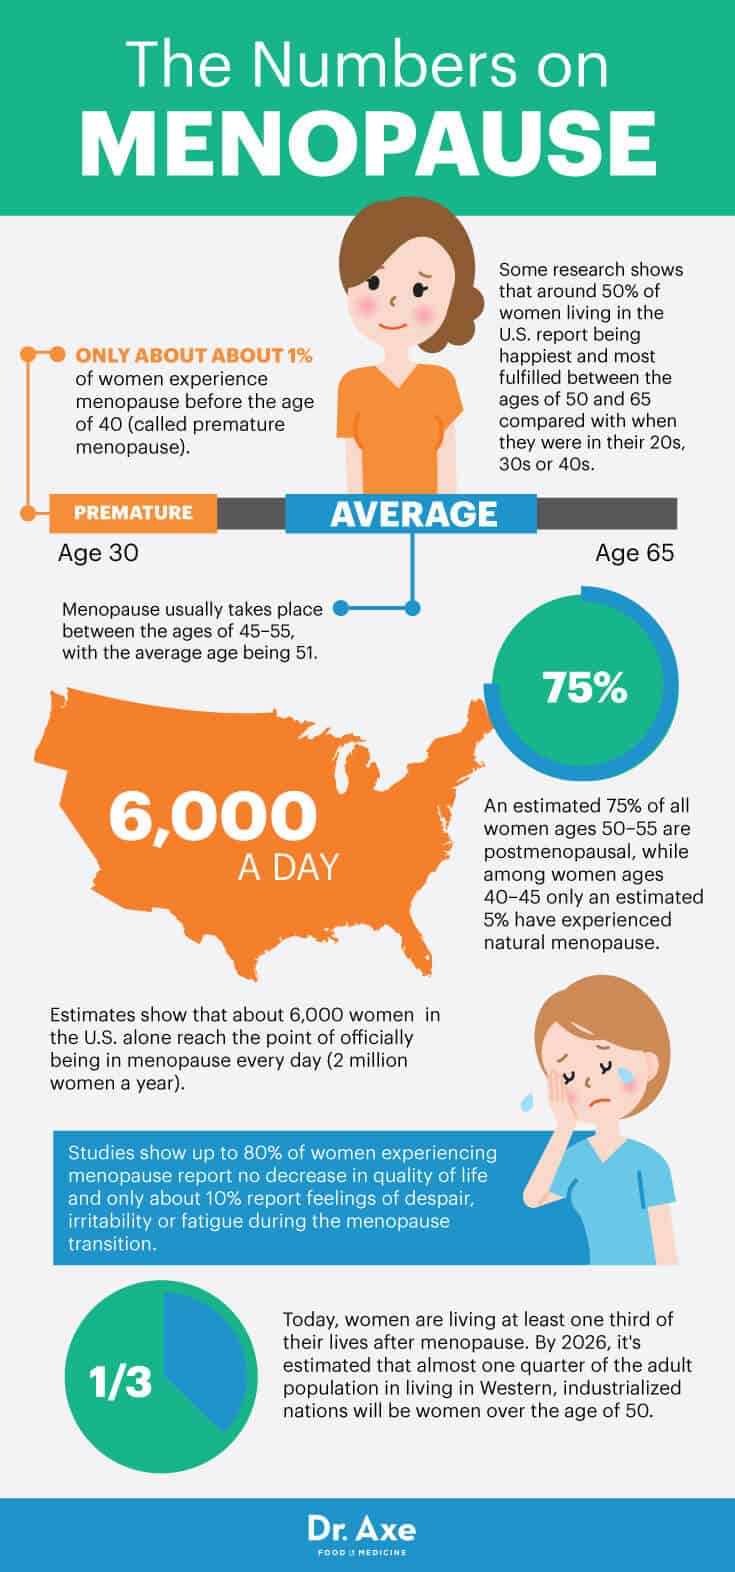 Menopause by the numbers - Dr. Axe